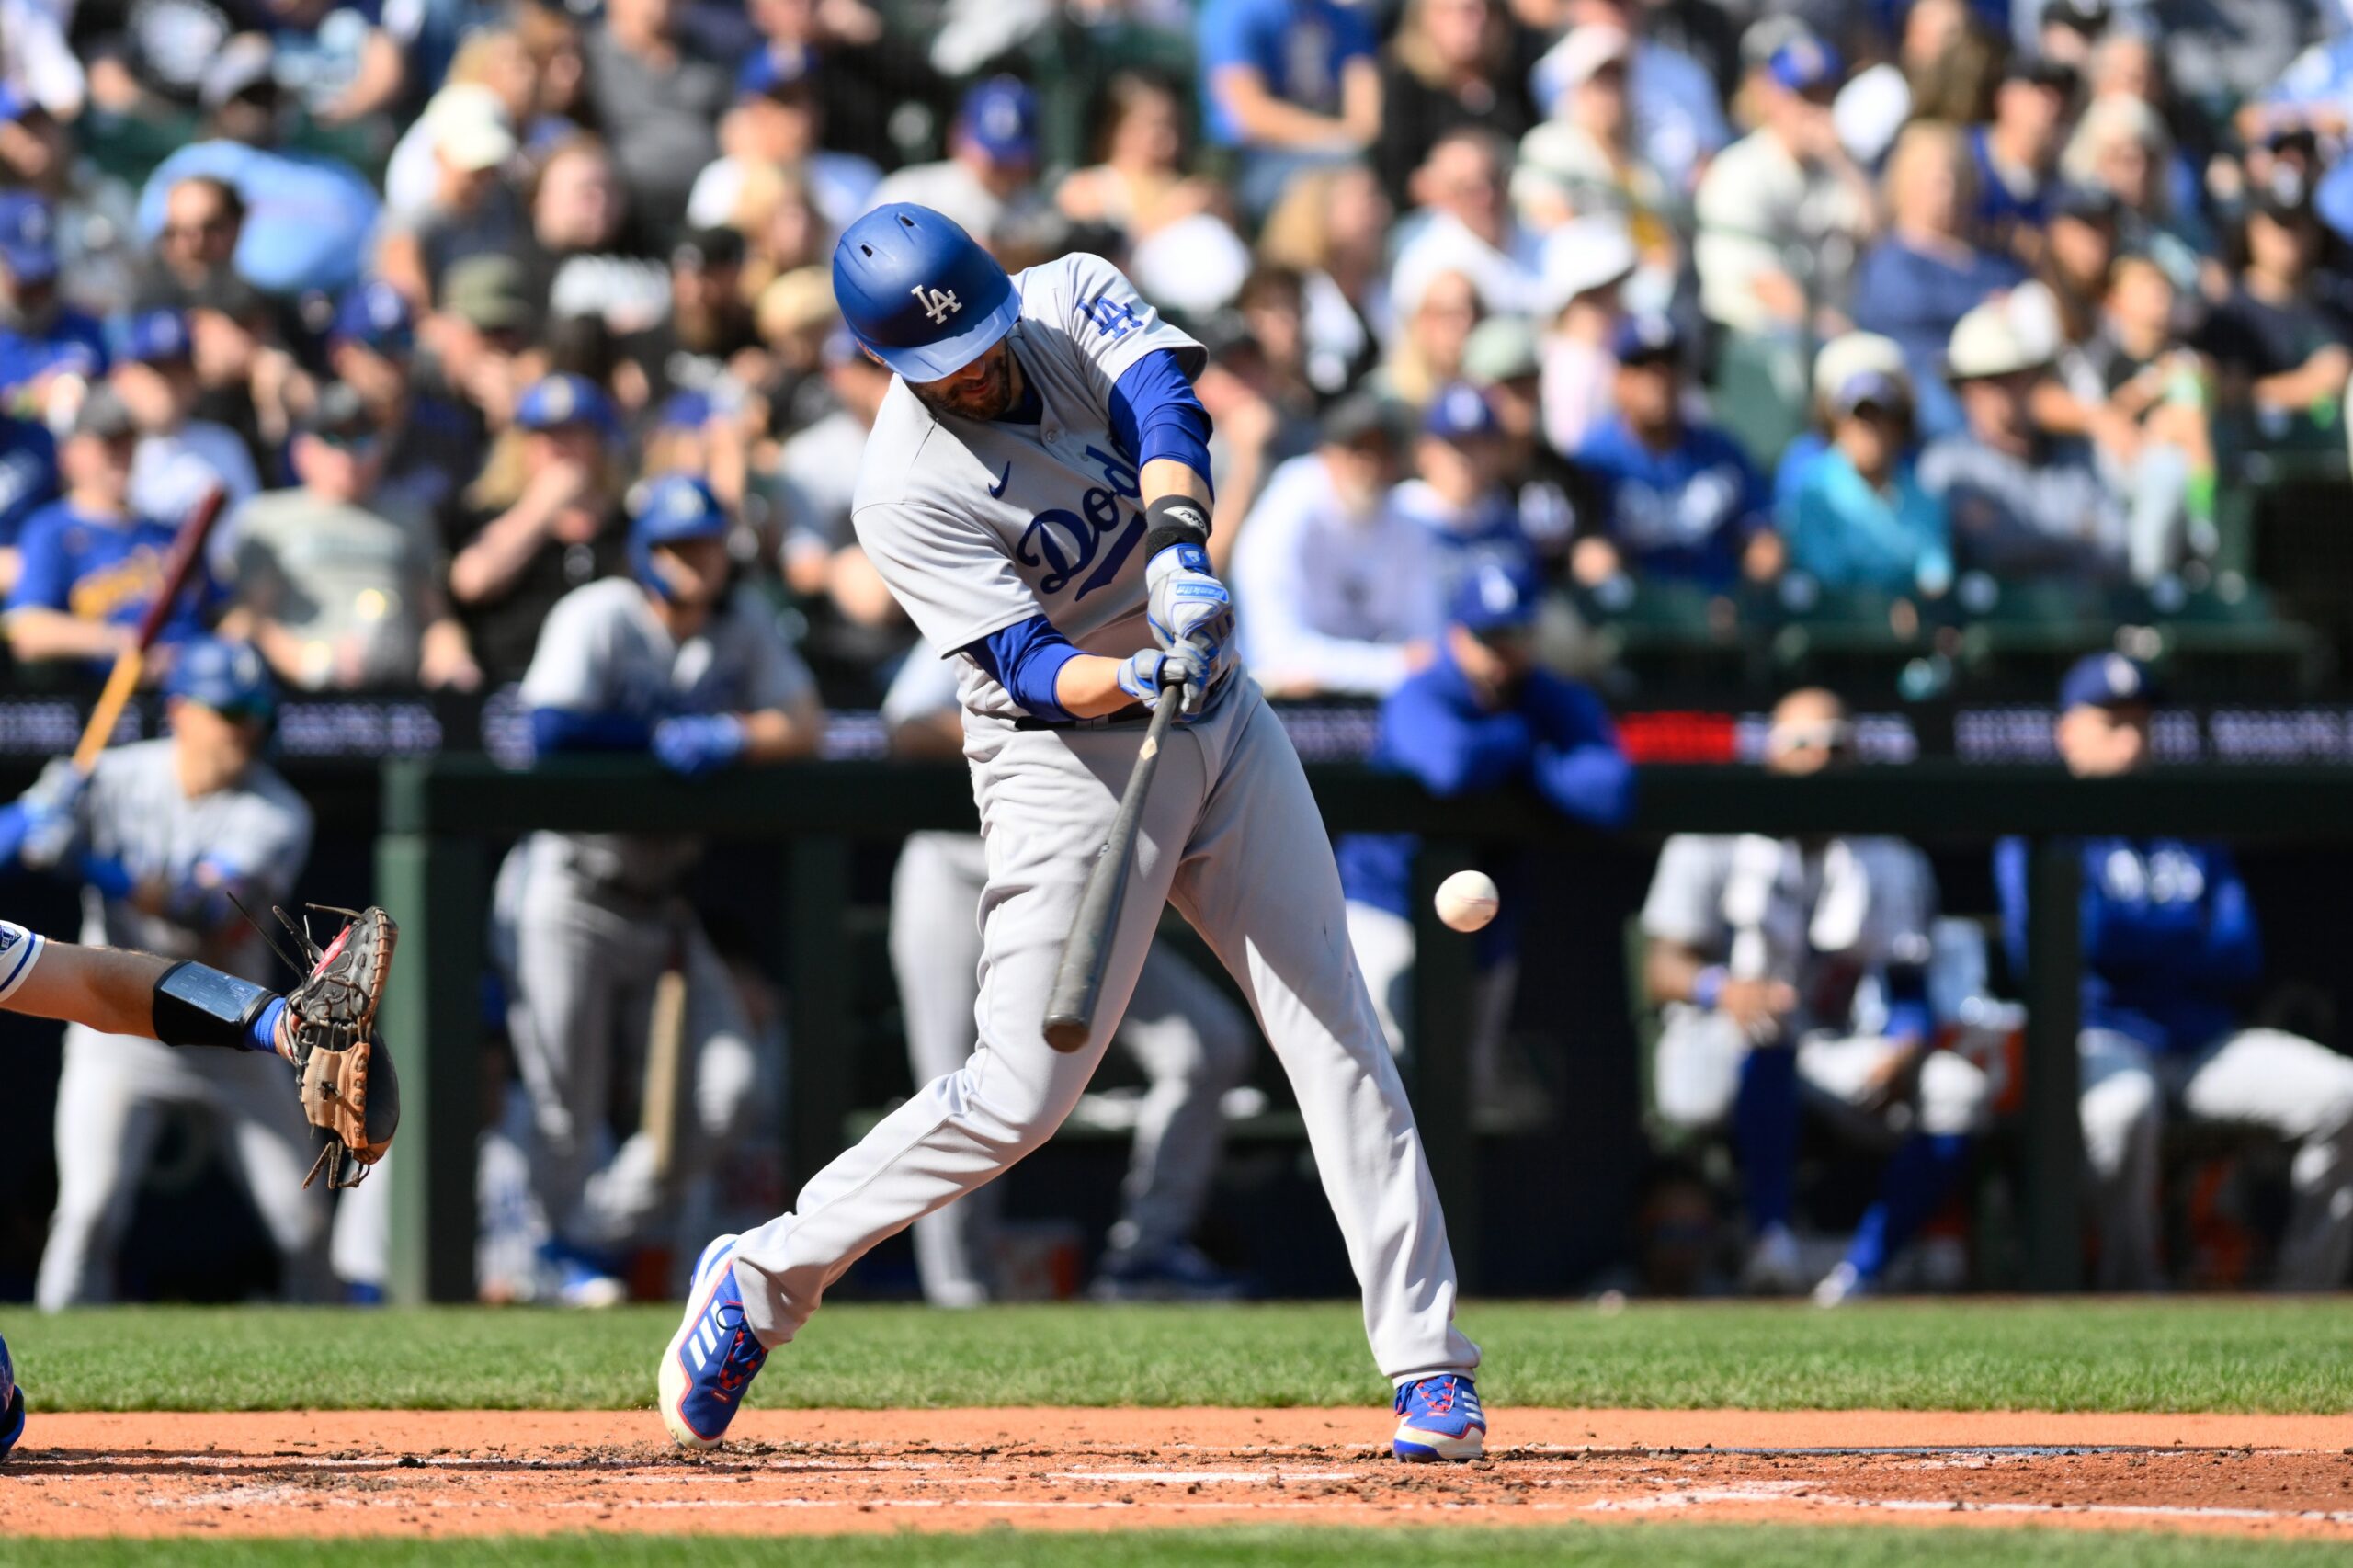 Dodgers News: Dave Roberts Talks About What JD Martinez Brings to